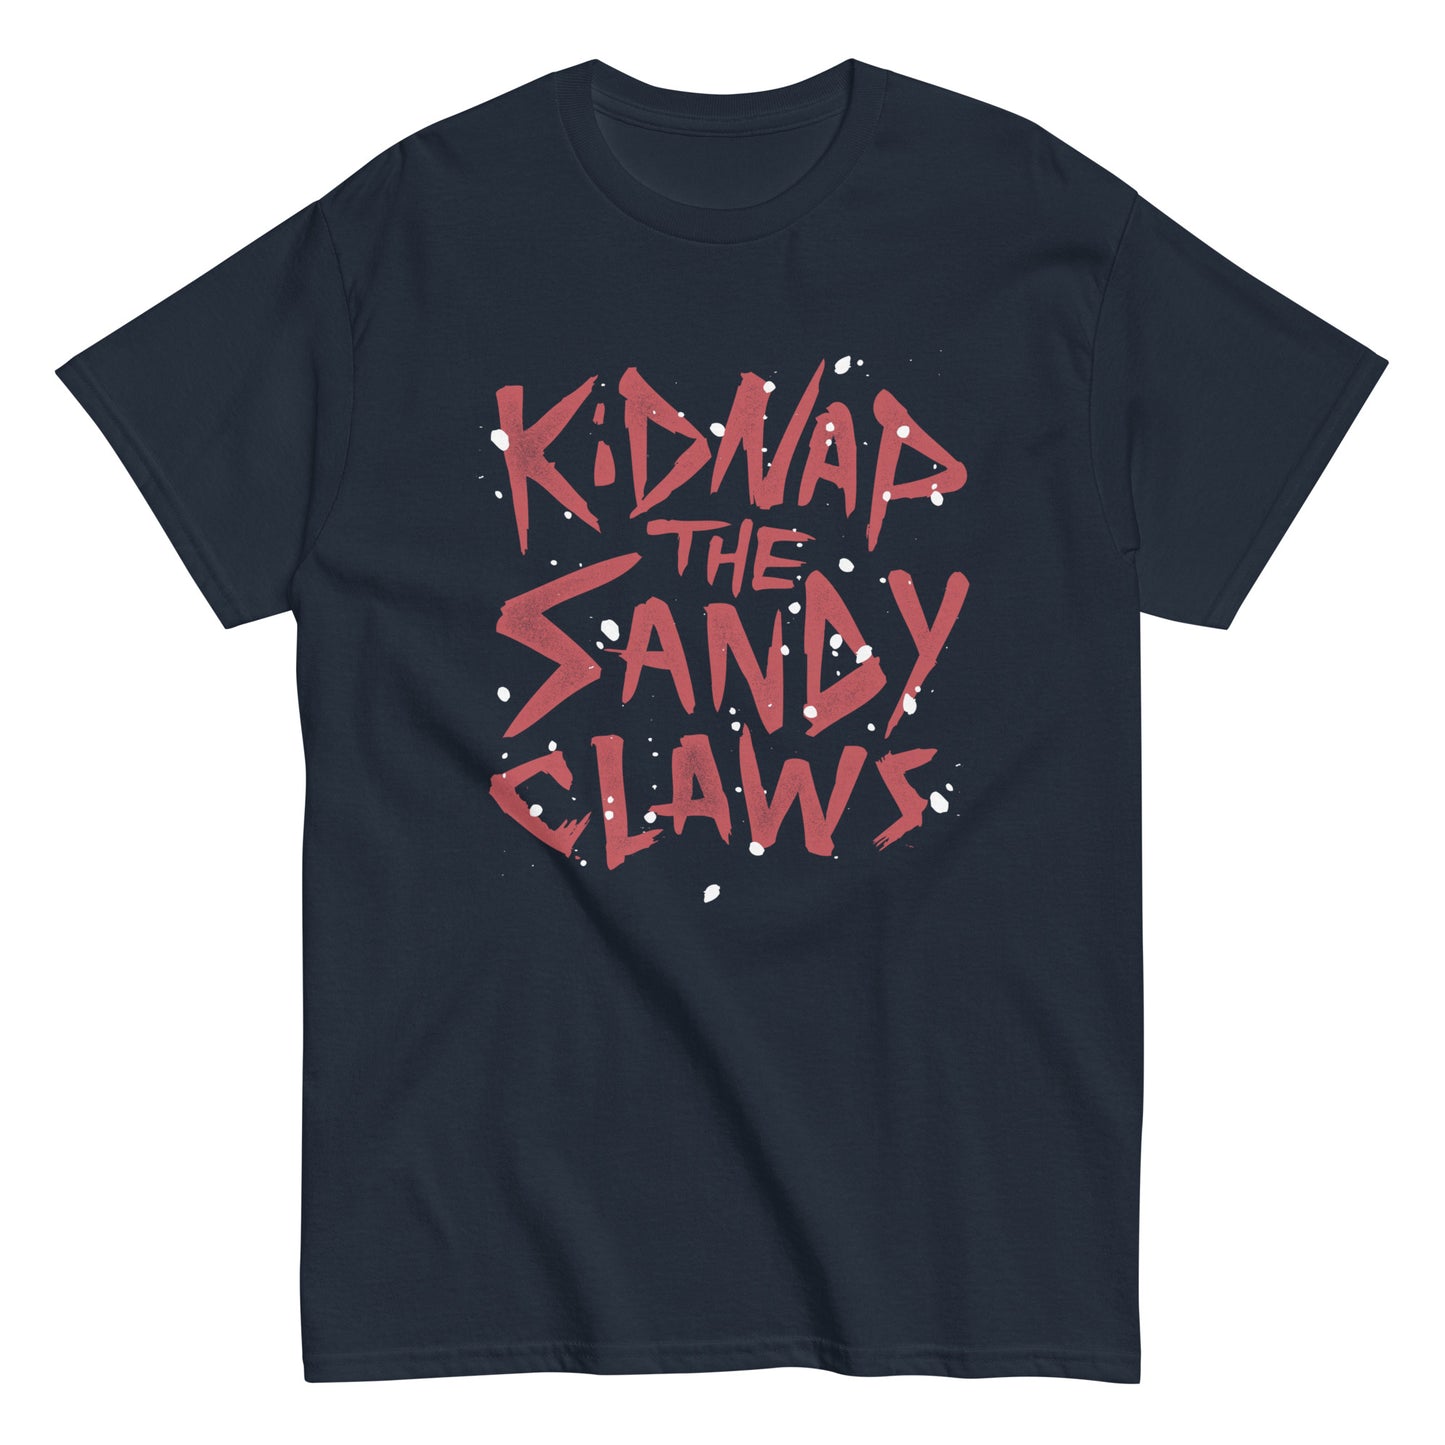 Kidnap The Sandy Claws Men's Classic Tee